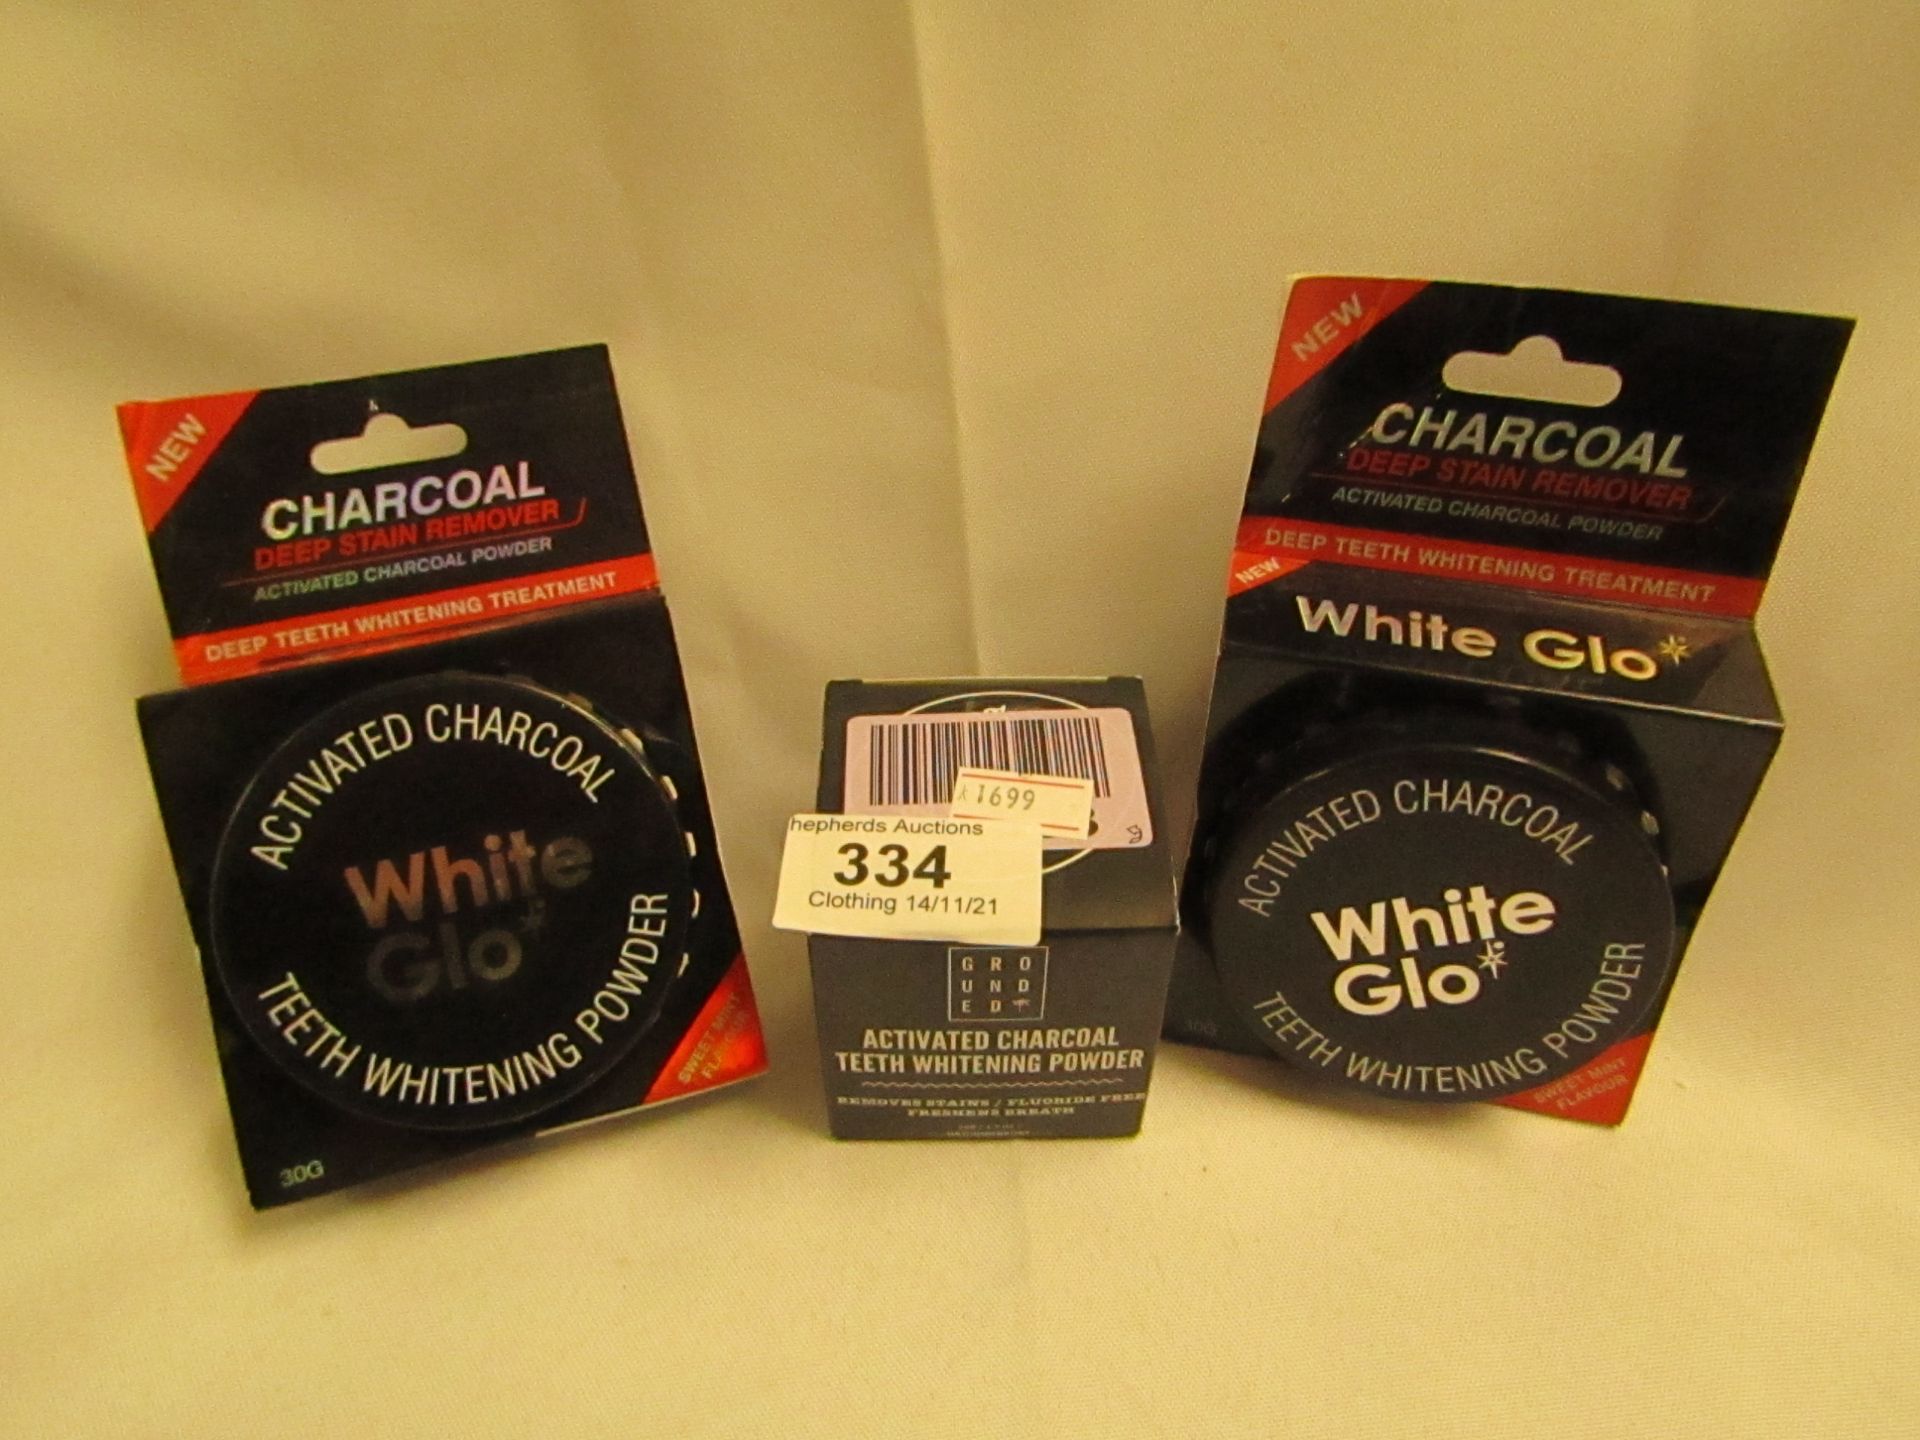 3 X White Glo Activated Charcoal Teeth Whitening Powder All new & Packaged